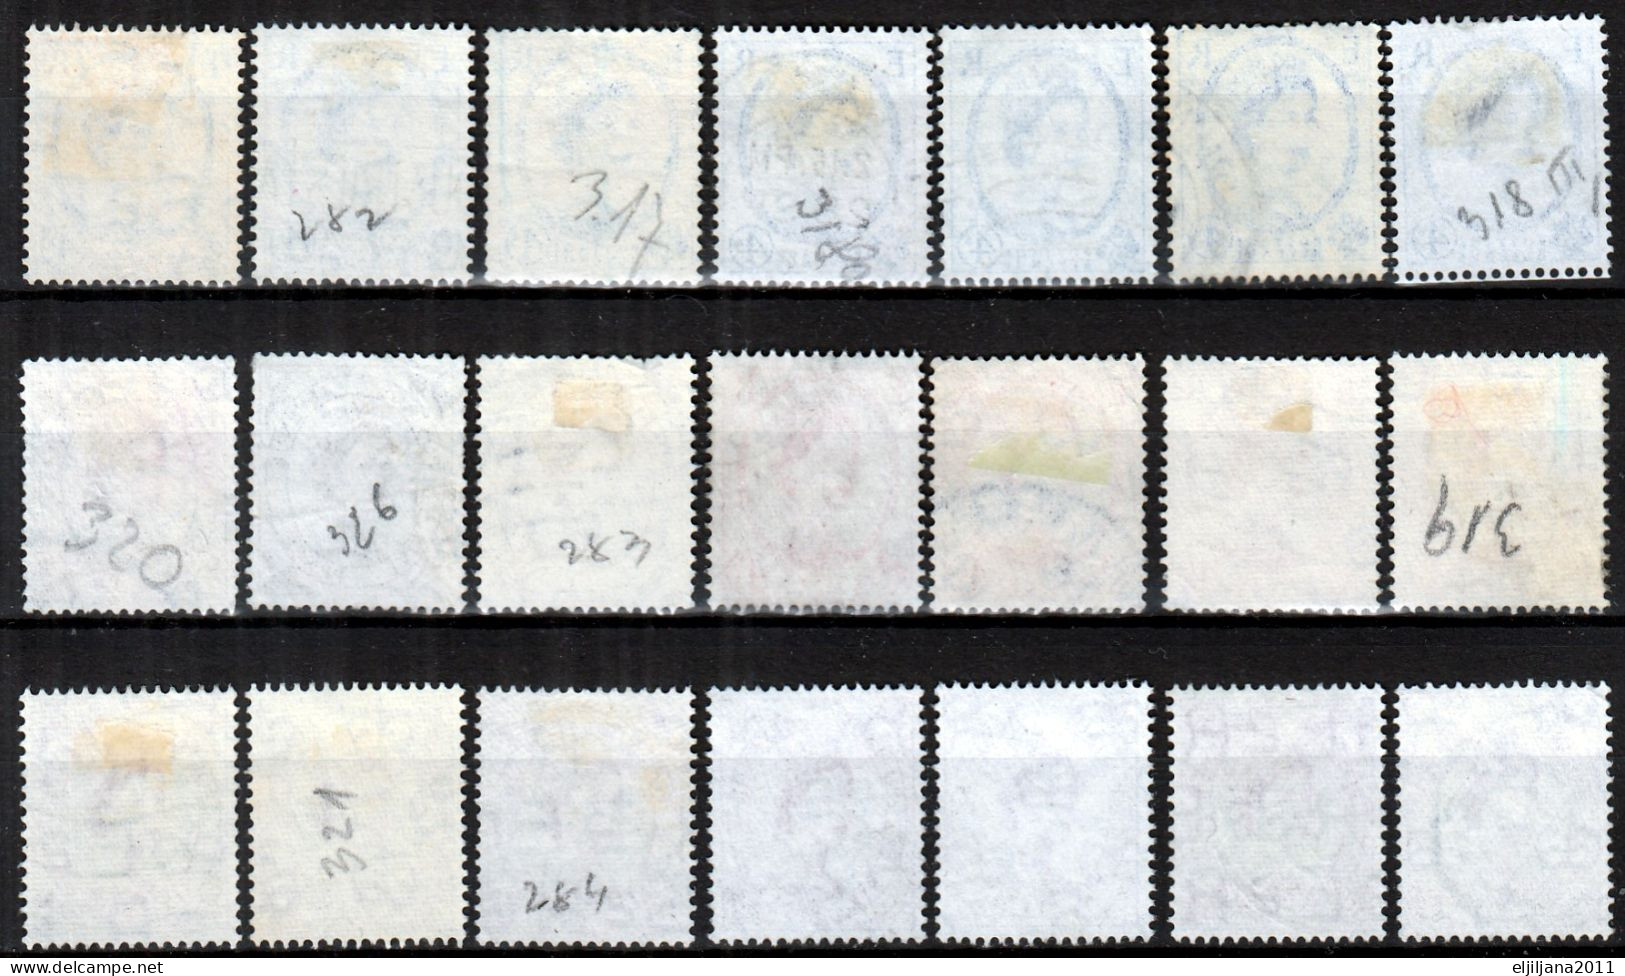 Great Britain - GB / UK / QEII. 1952 - 1967 ⁕ Queen Elizabeth II. ⁕ 98v used stamps / unchecked - see all scan